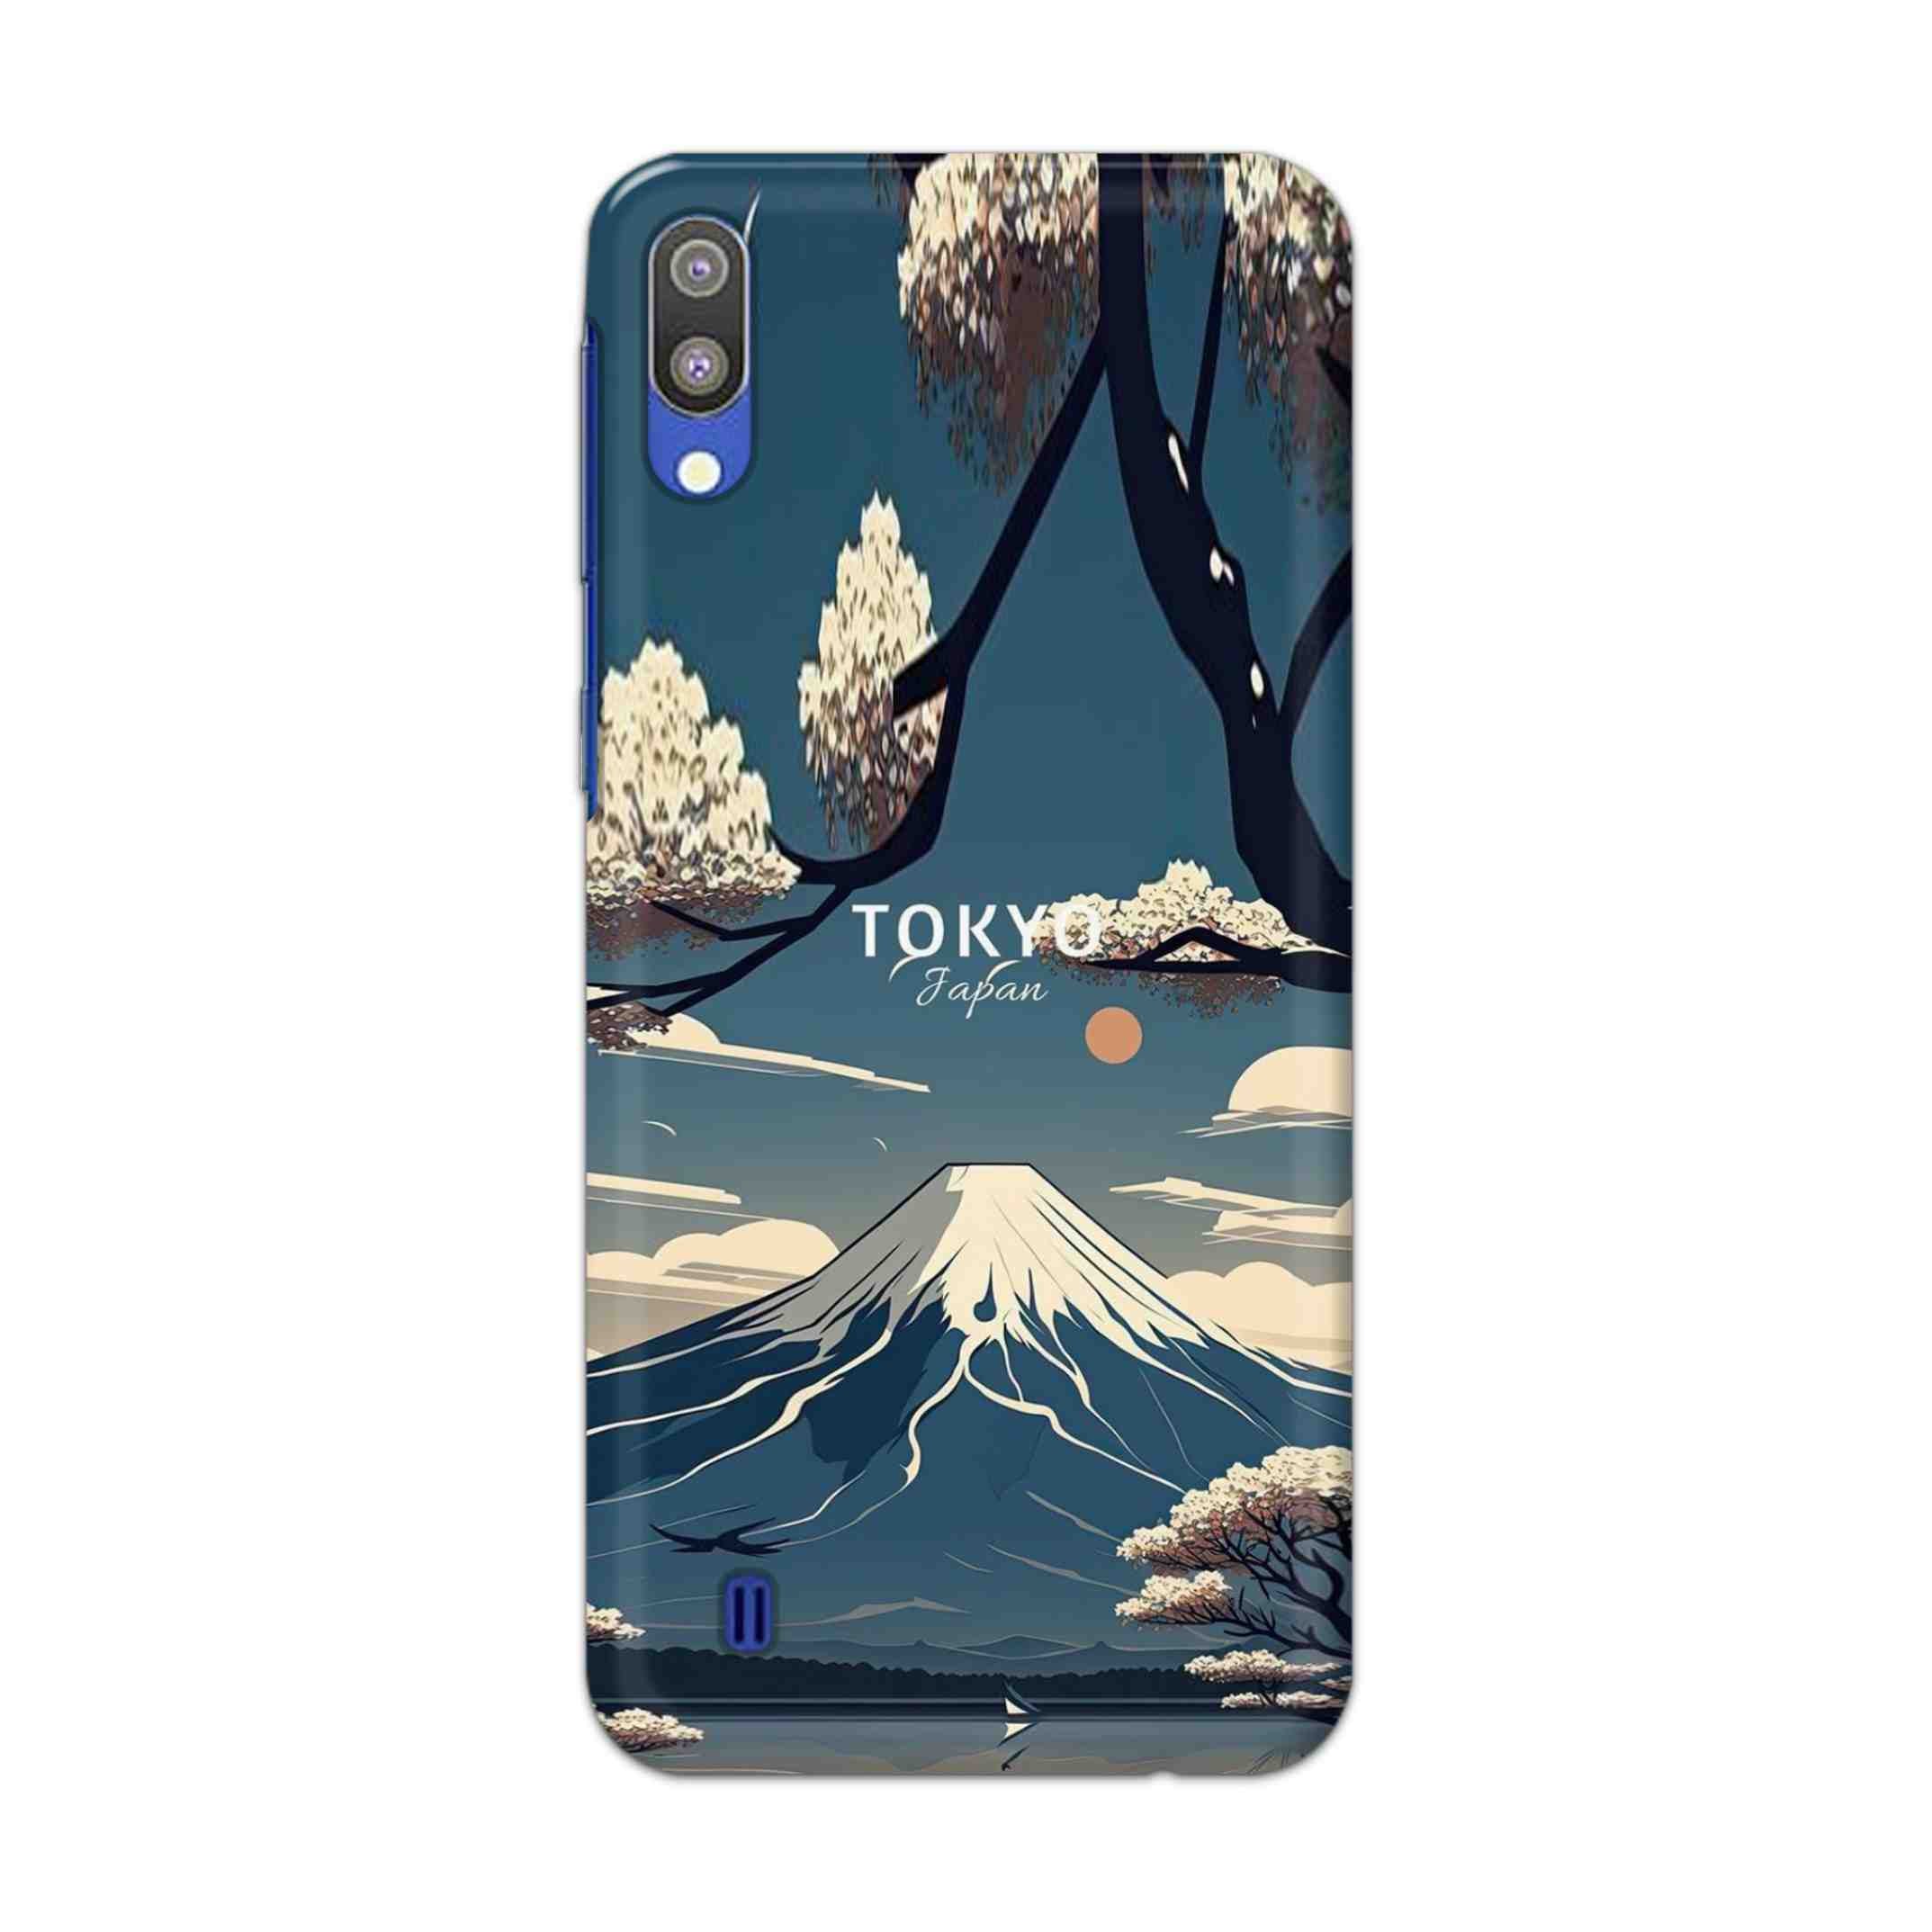 Buy Tokyo Hard Back Mobile Phone Case Cover For Samsung Galaxy M10 Online